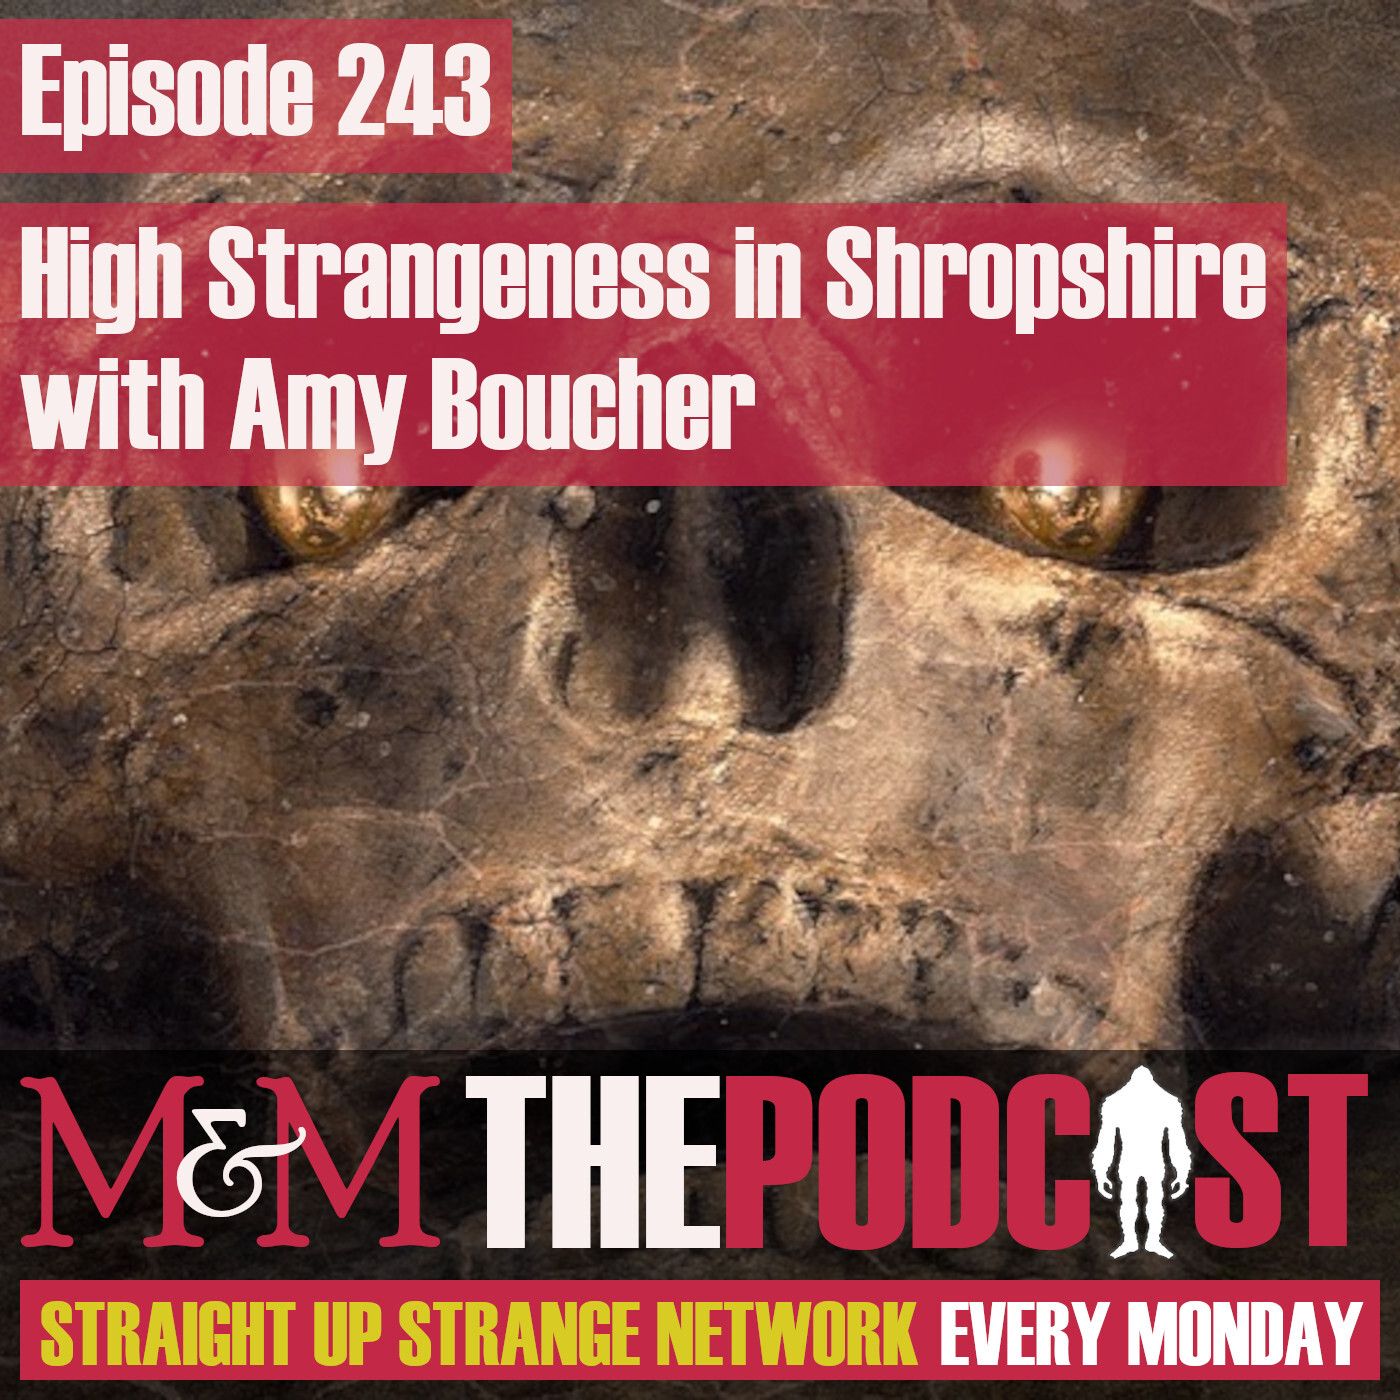 Mysteries and Monsters: Episode 243 High Strangeness in Shropshire with Amy Boucher